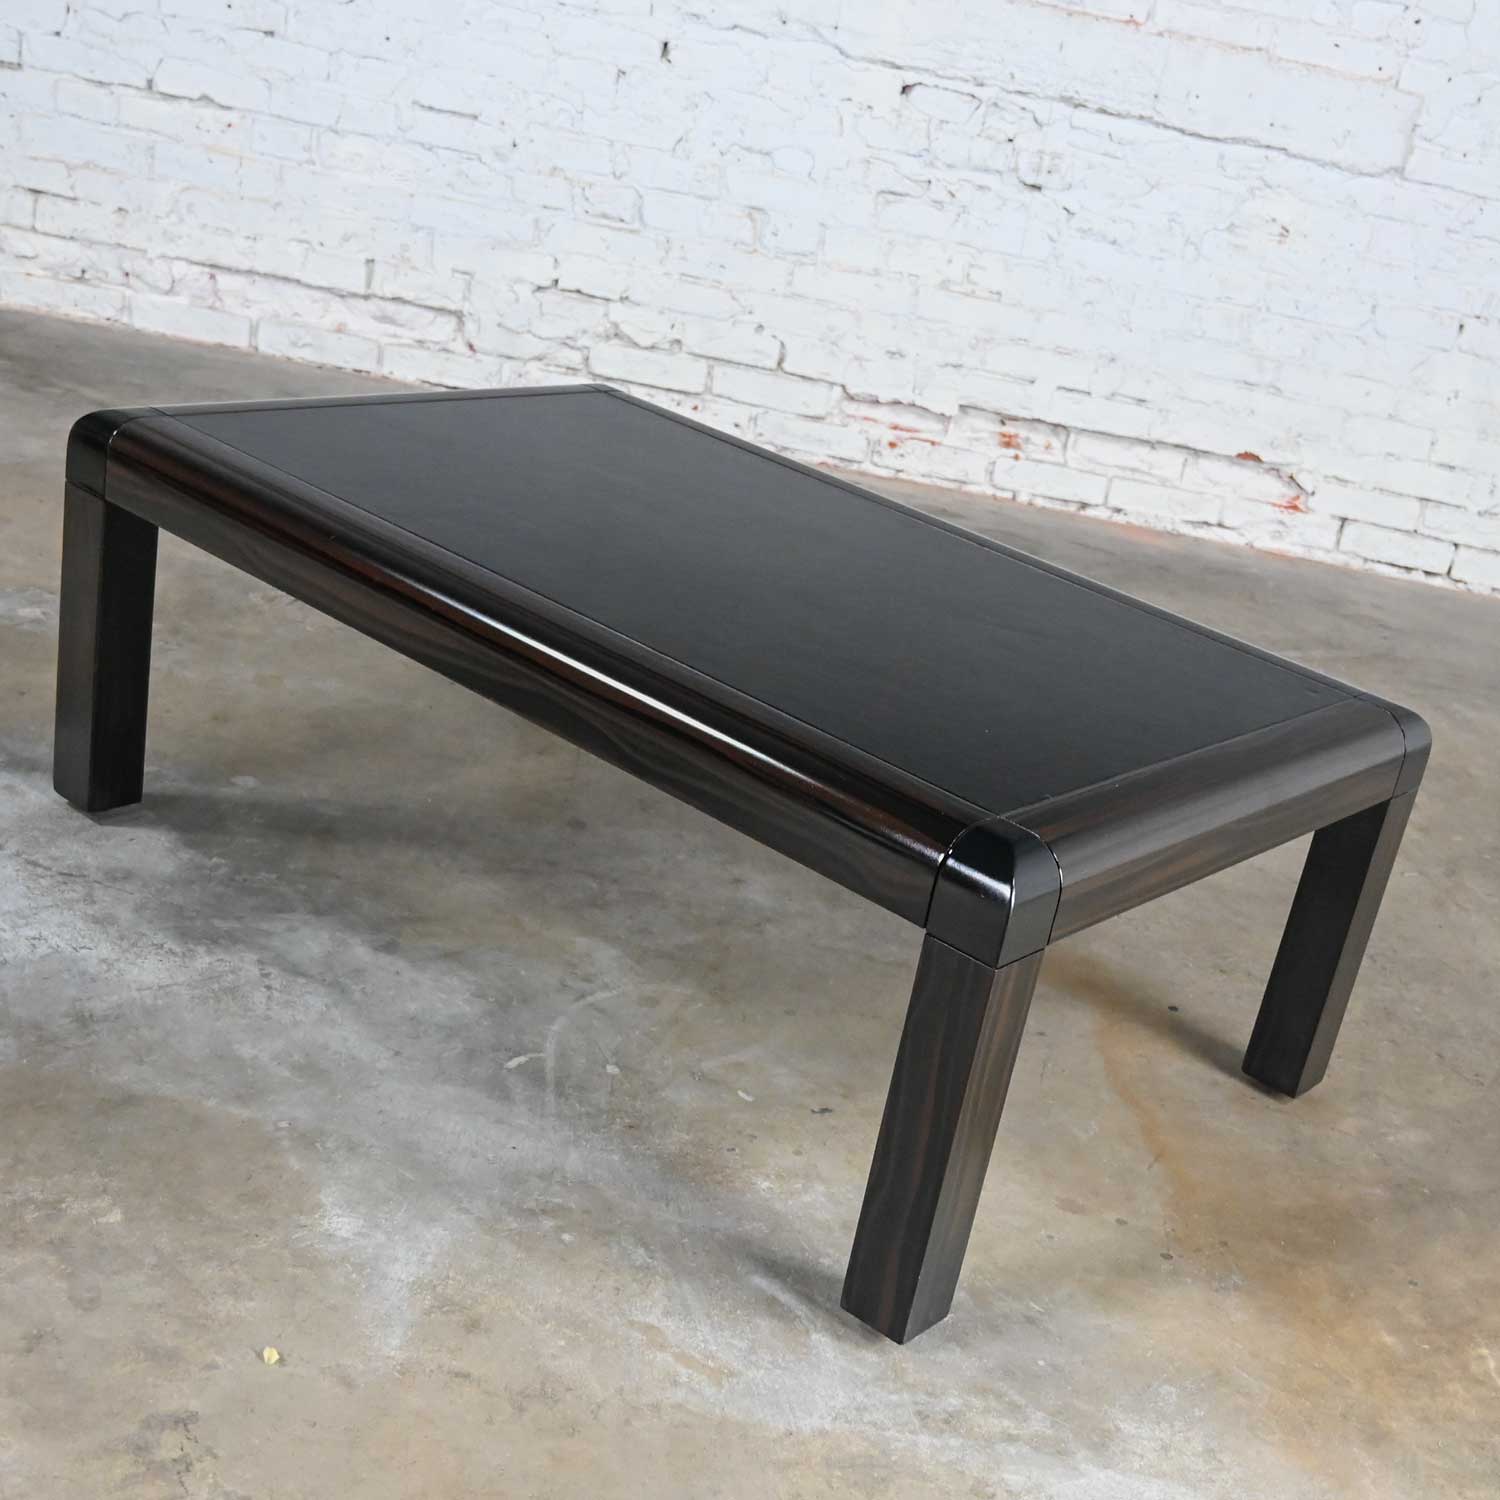 VVintage Modern Coffee Table Black & Faux Finish Lacquer with Black Leather Top Signed by Karl Springerintage Modern Coffee Table Black & Faux Finish Lacquer with Black Leather Top Signed by Karl Springer